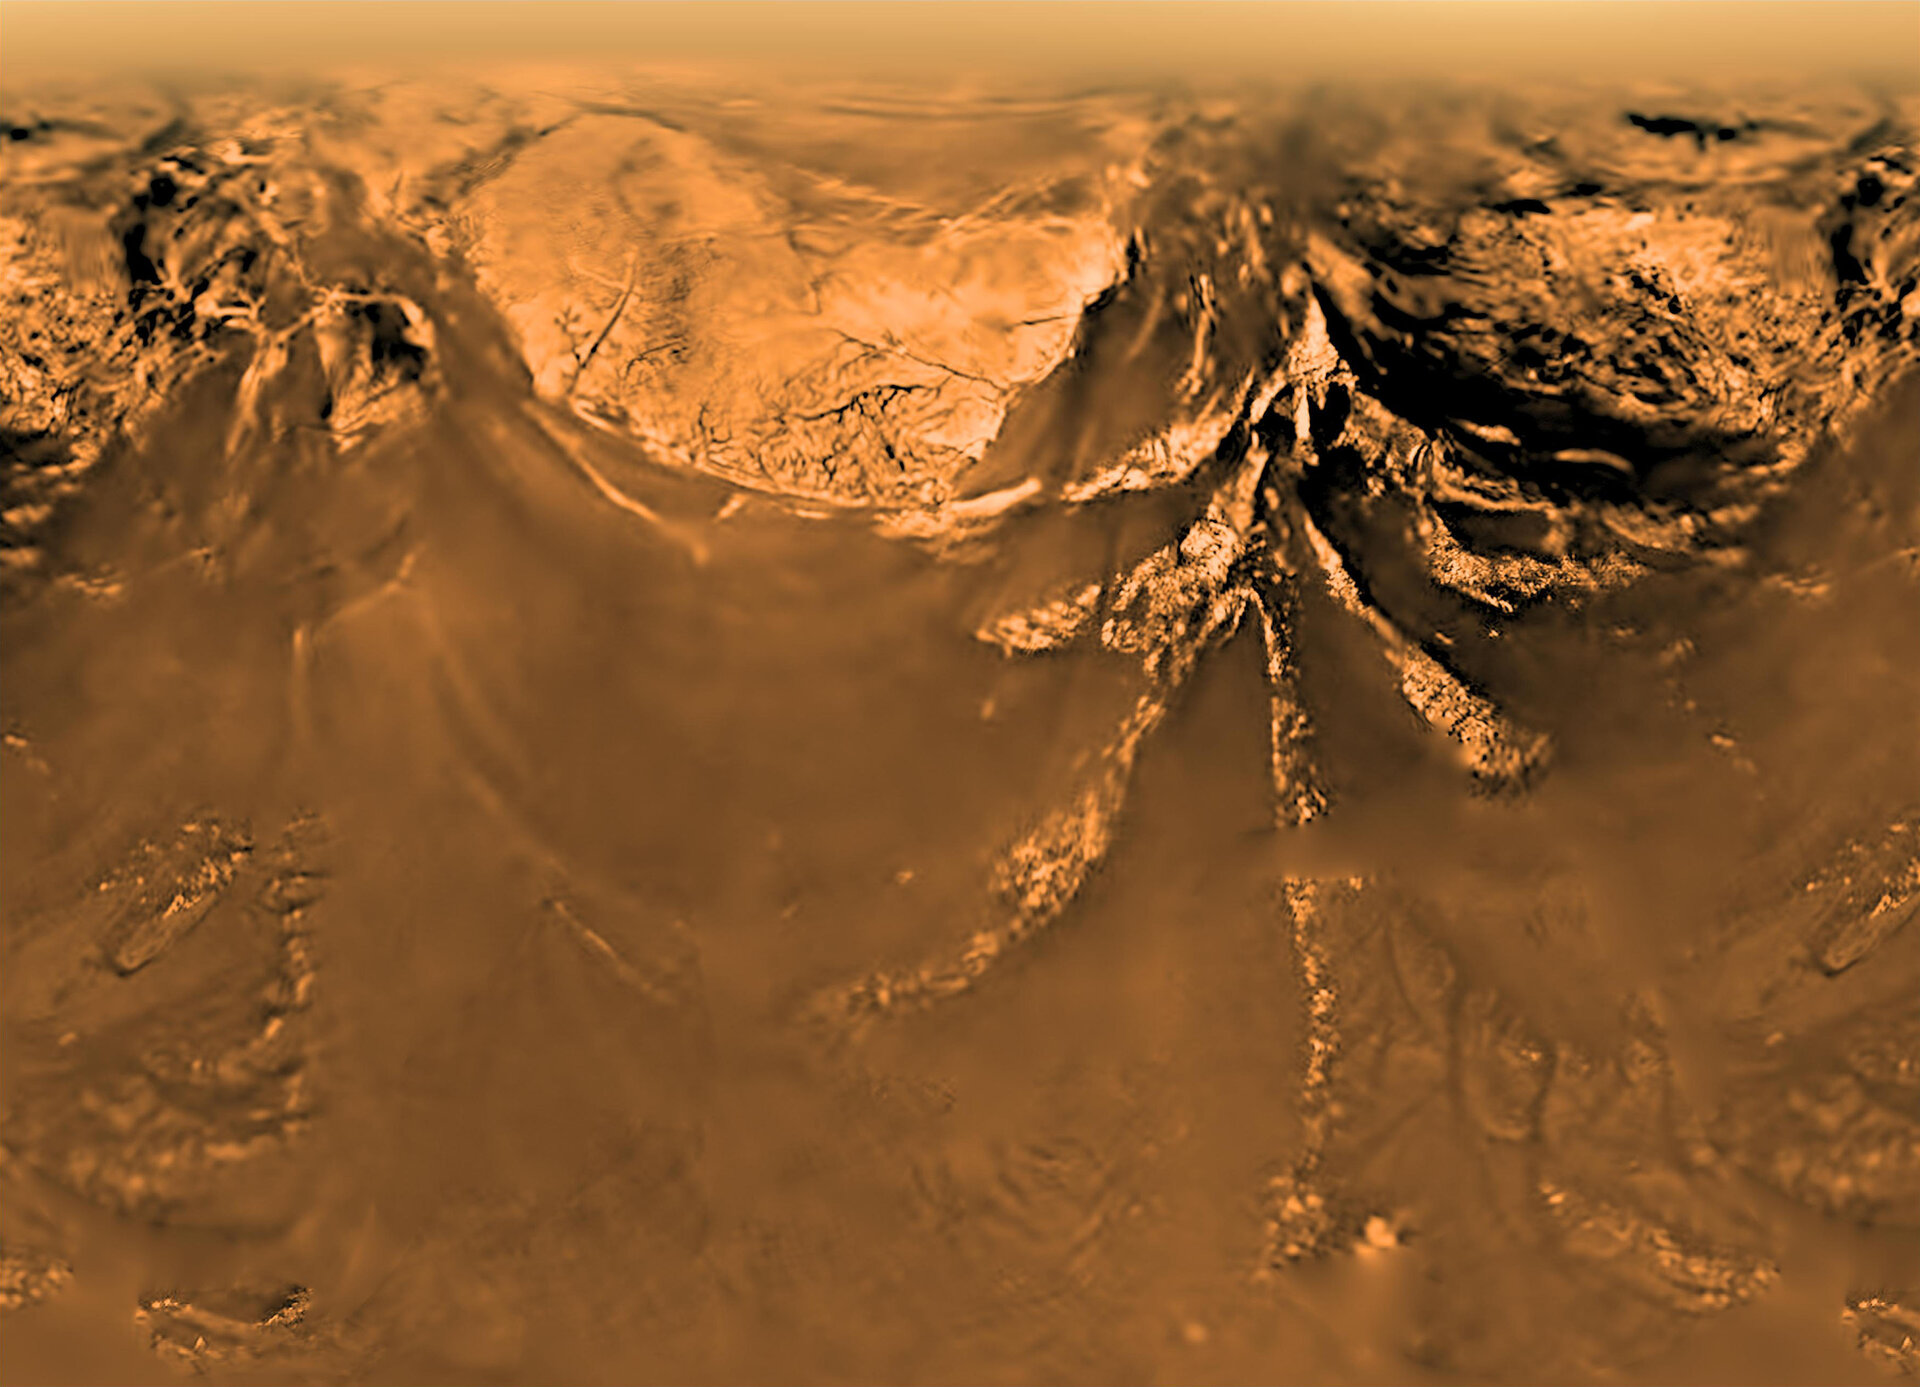 The surface of Saturn's moon Titan, seen from ESA's Huygens probe as it descended to land in 2005